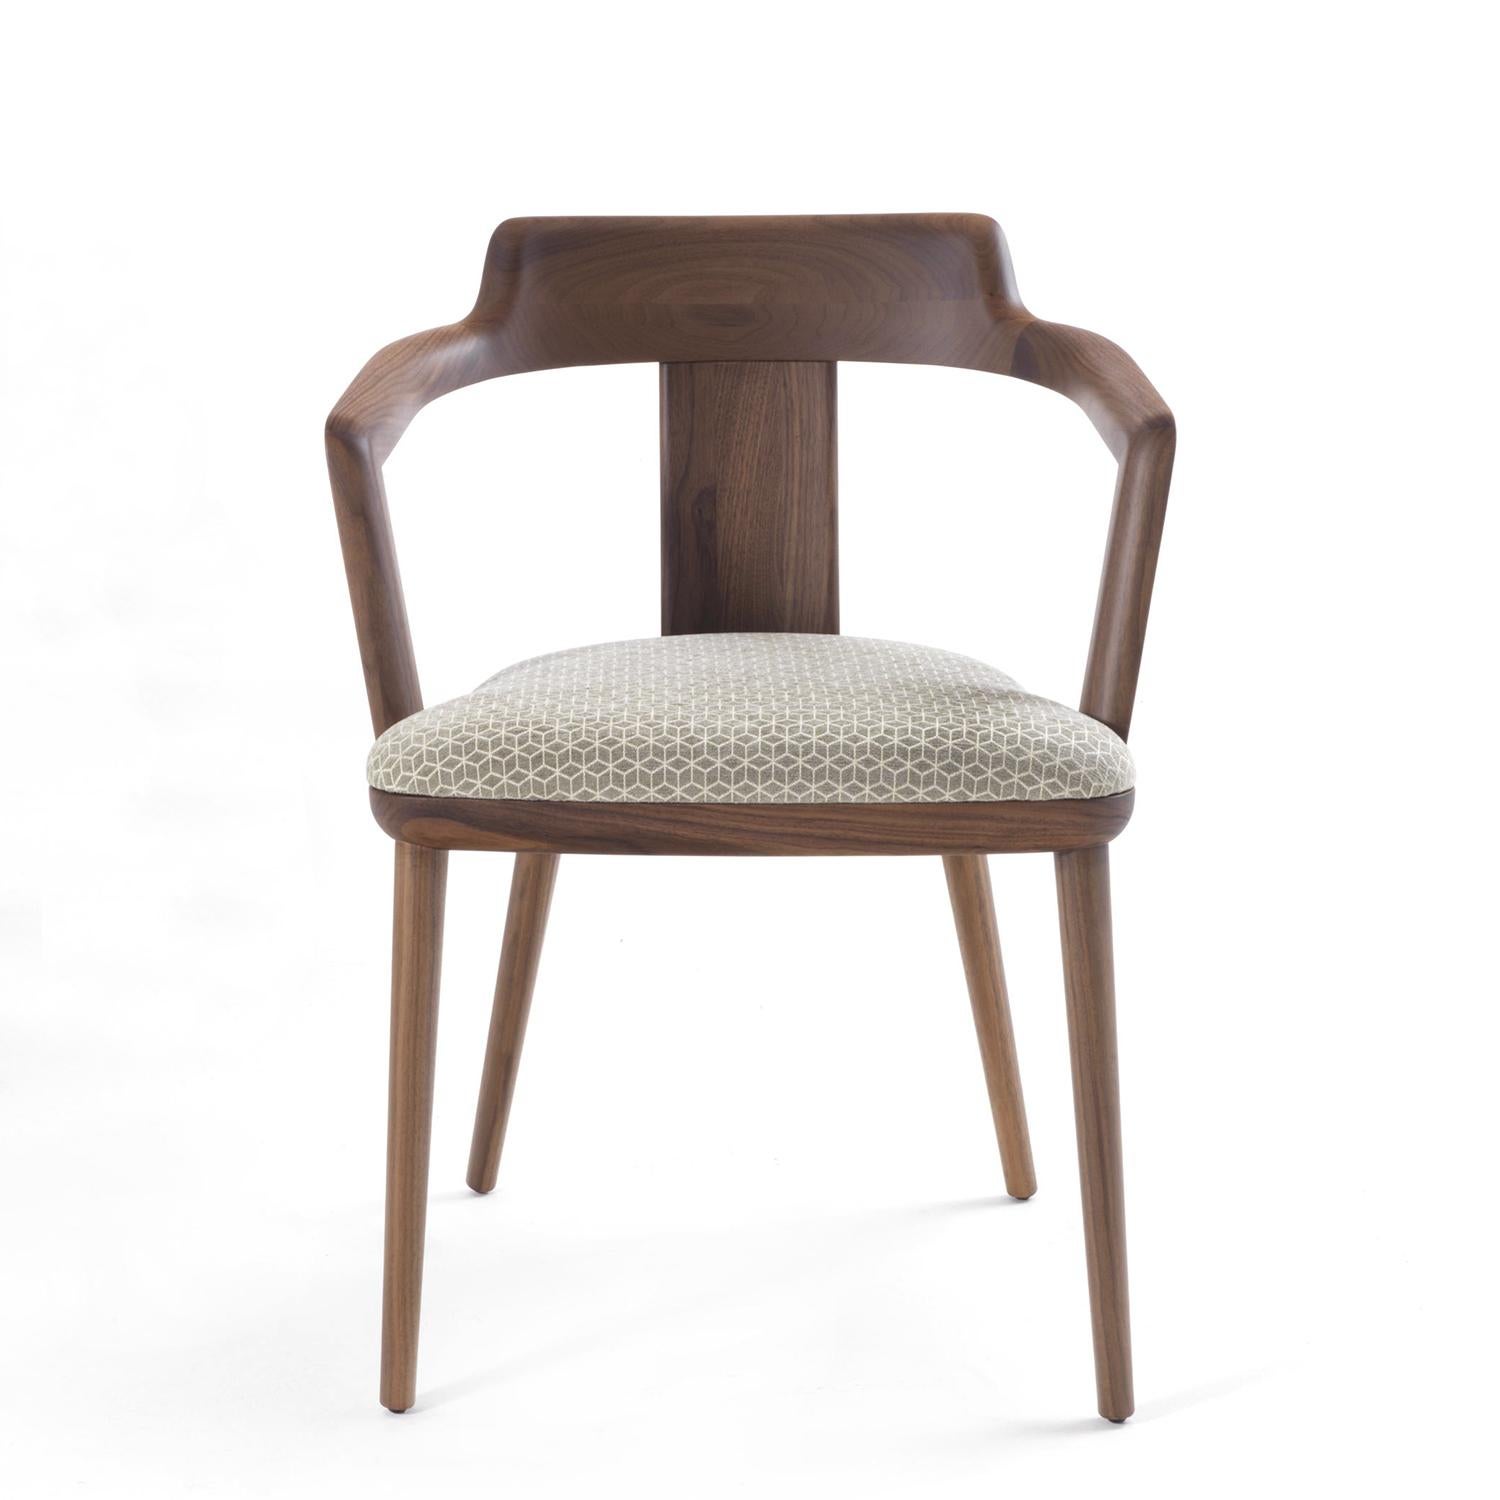 Chair Alba with all structure in solid walnut wood,
seat upholstered and covered with fabric Cat B.
Also available with other fabrics or leathers covering, on request.